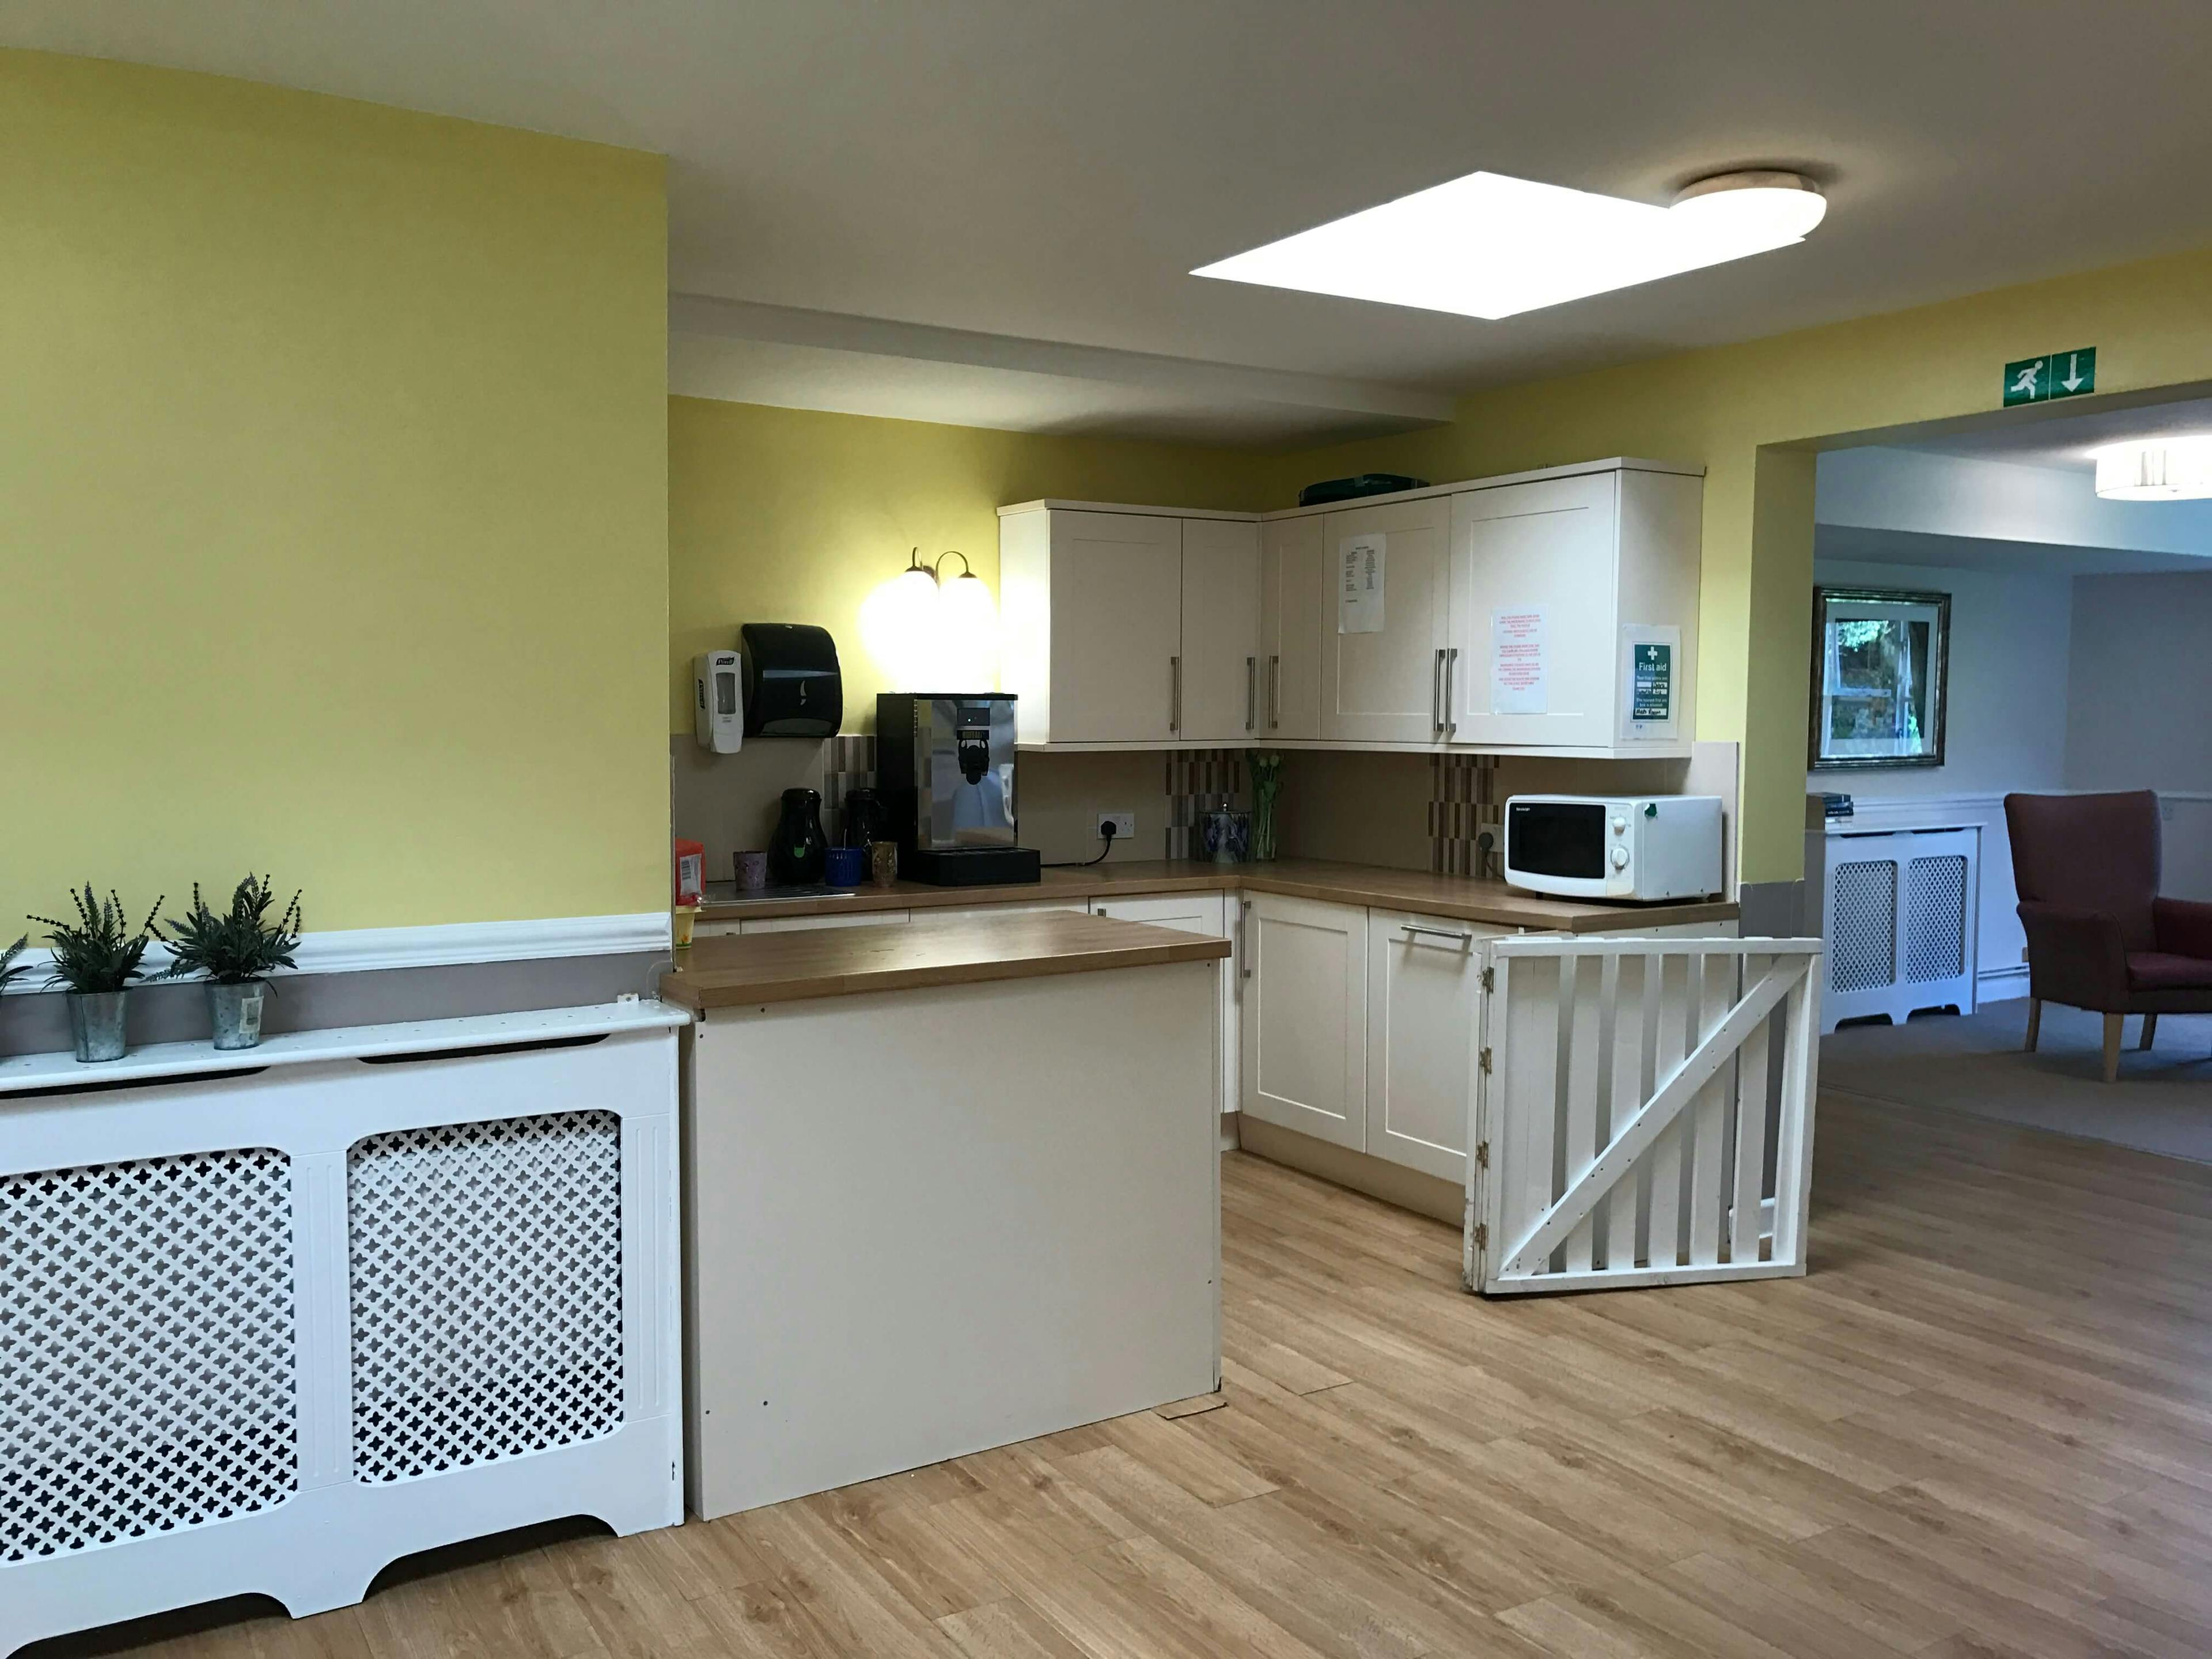 Kitchen of Kirby Grange care home in Botcheston, Leicester